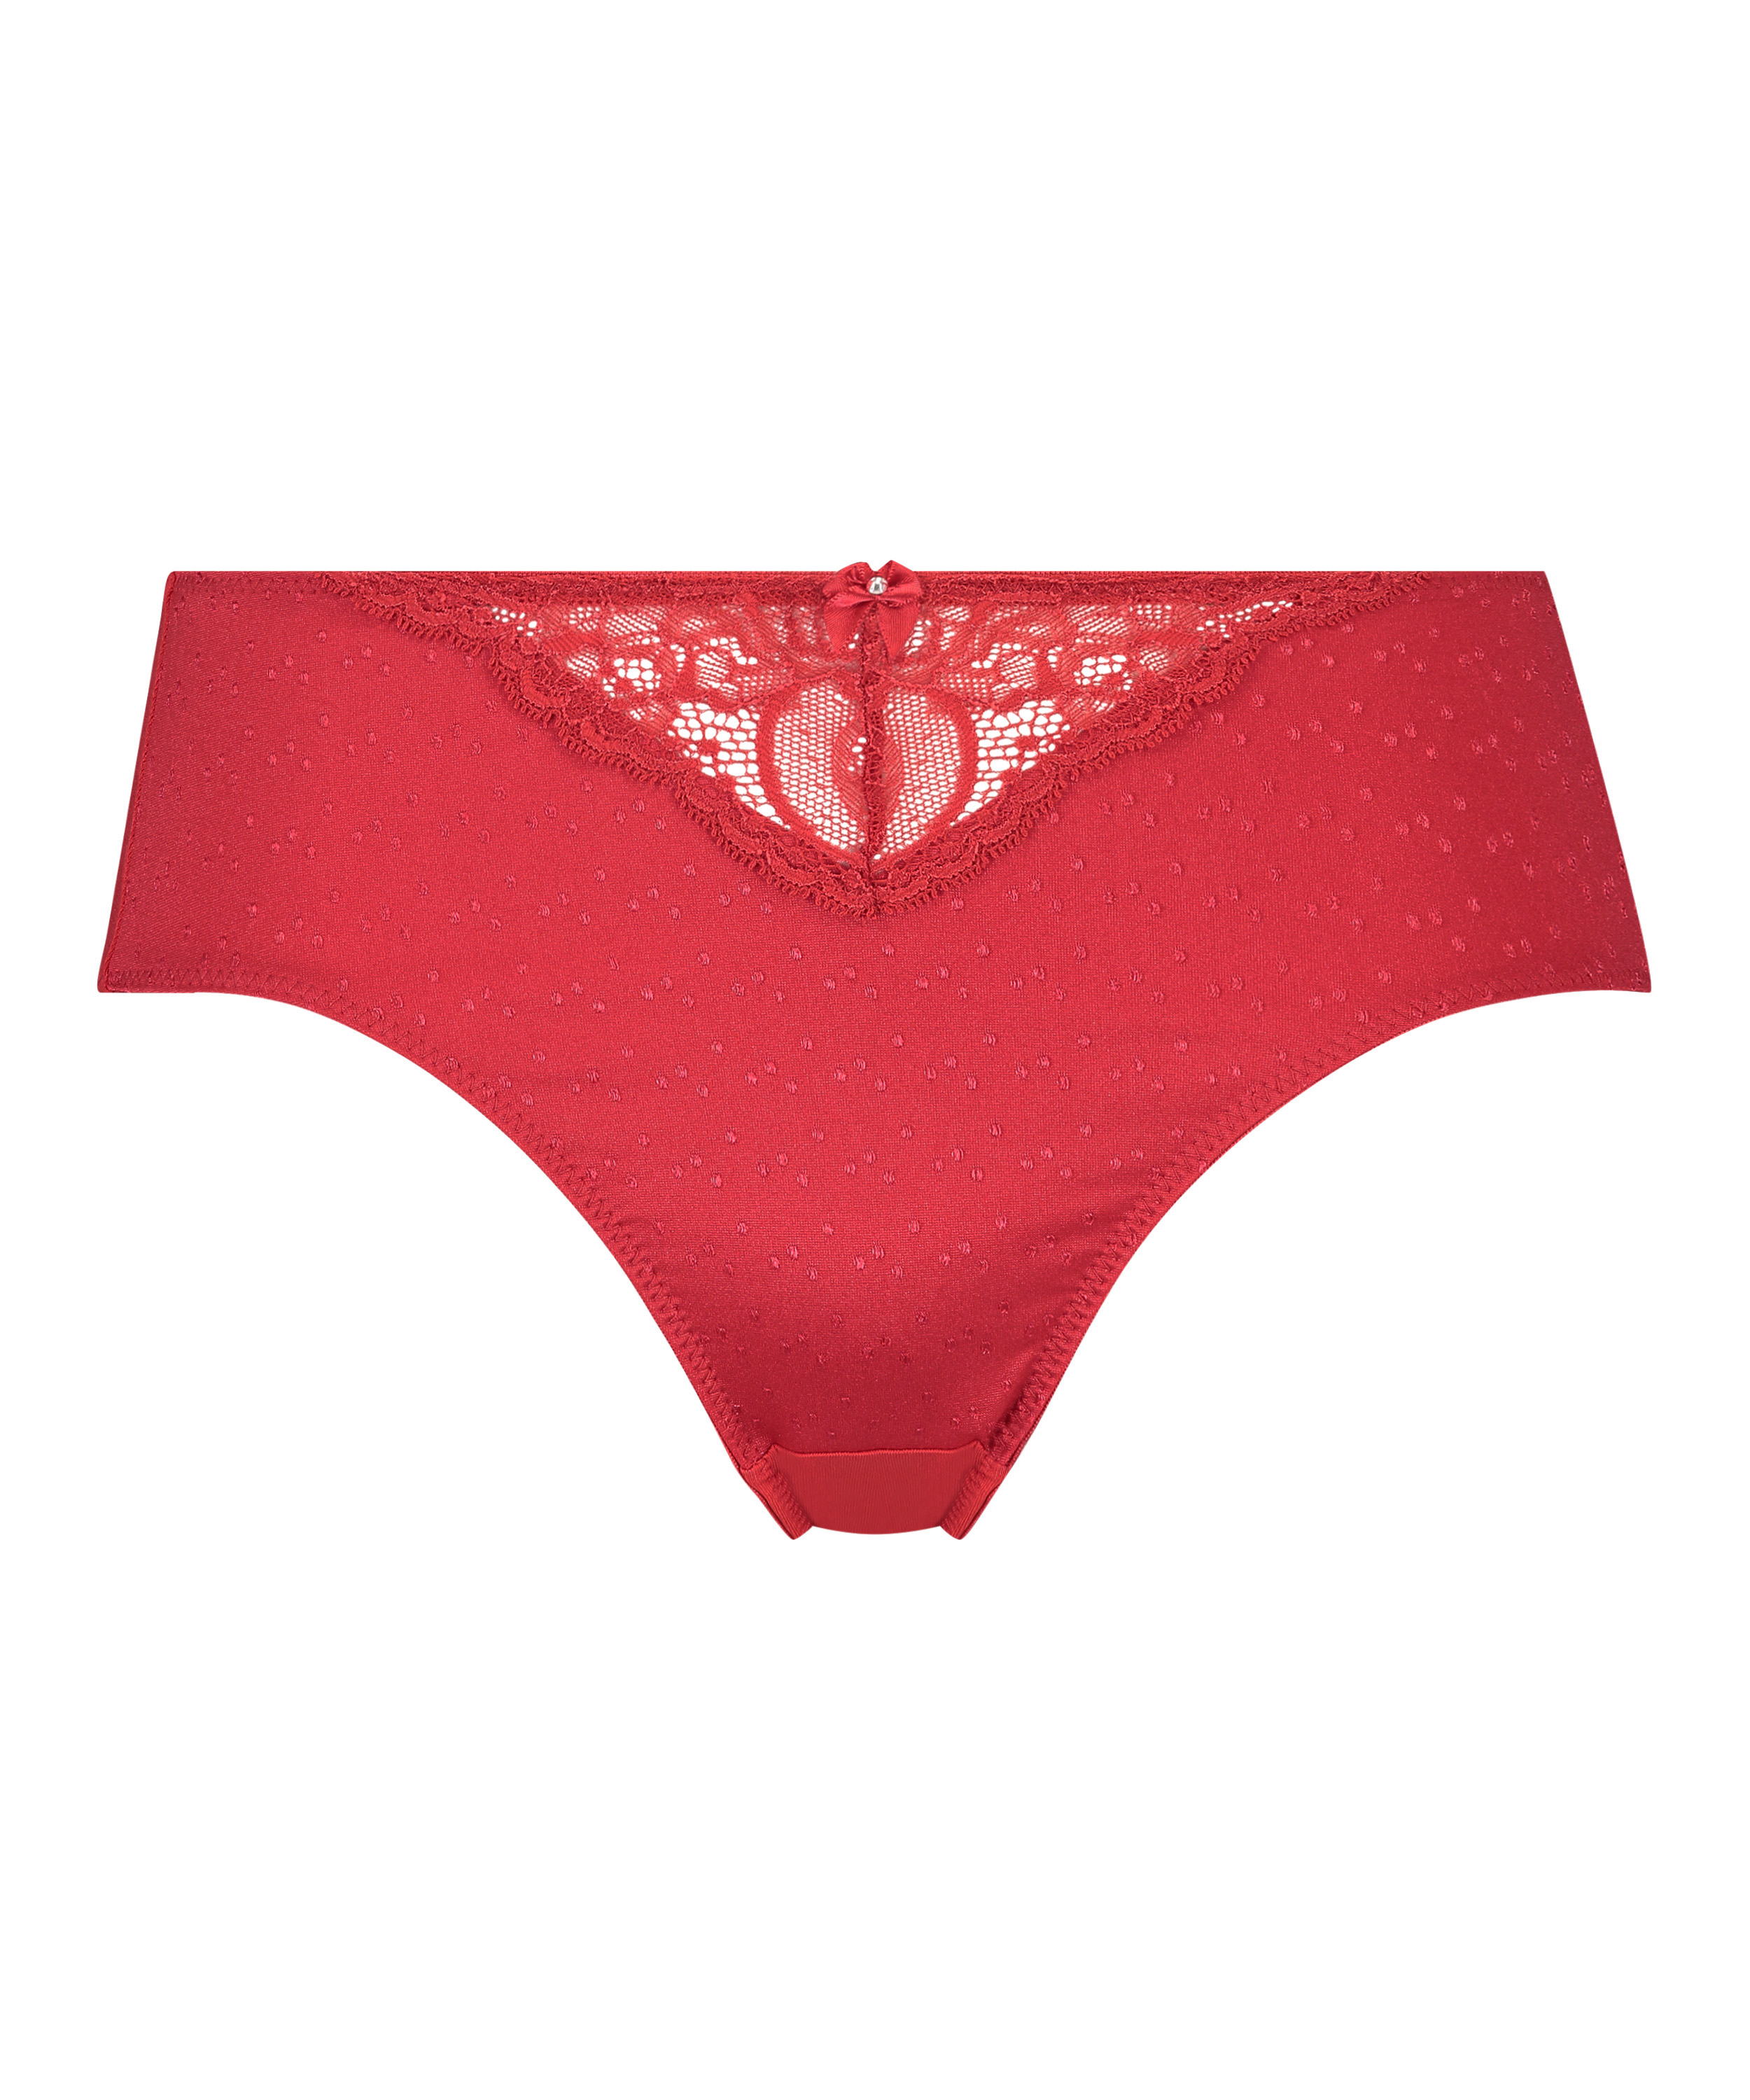 Sophie high knickers, Red, main